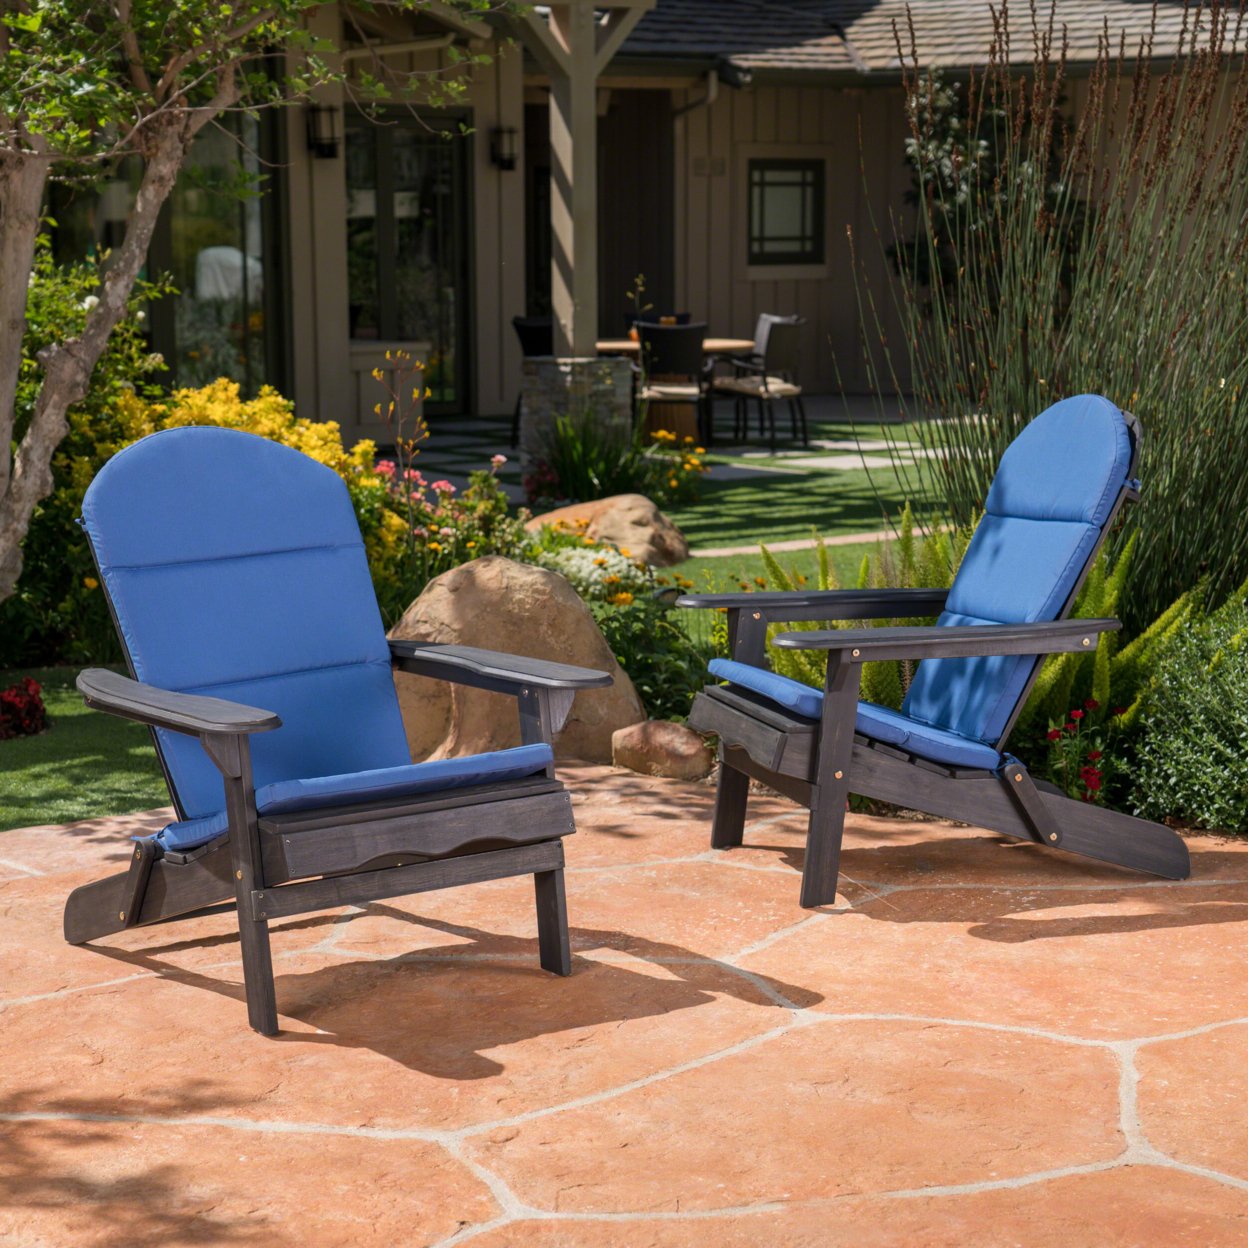 Nelie Outdoor Acacia Wood Adirondack Chairs With Cushions - Navy Blue, Set Of 2